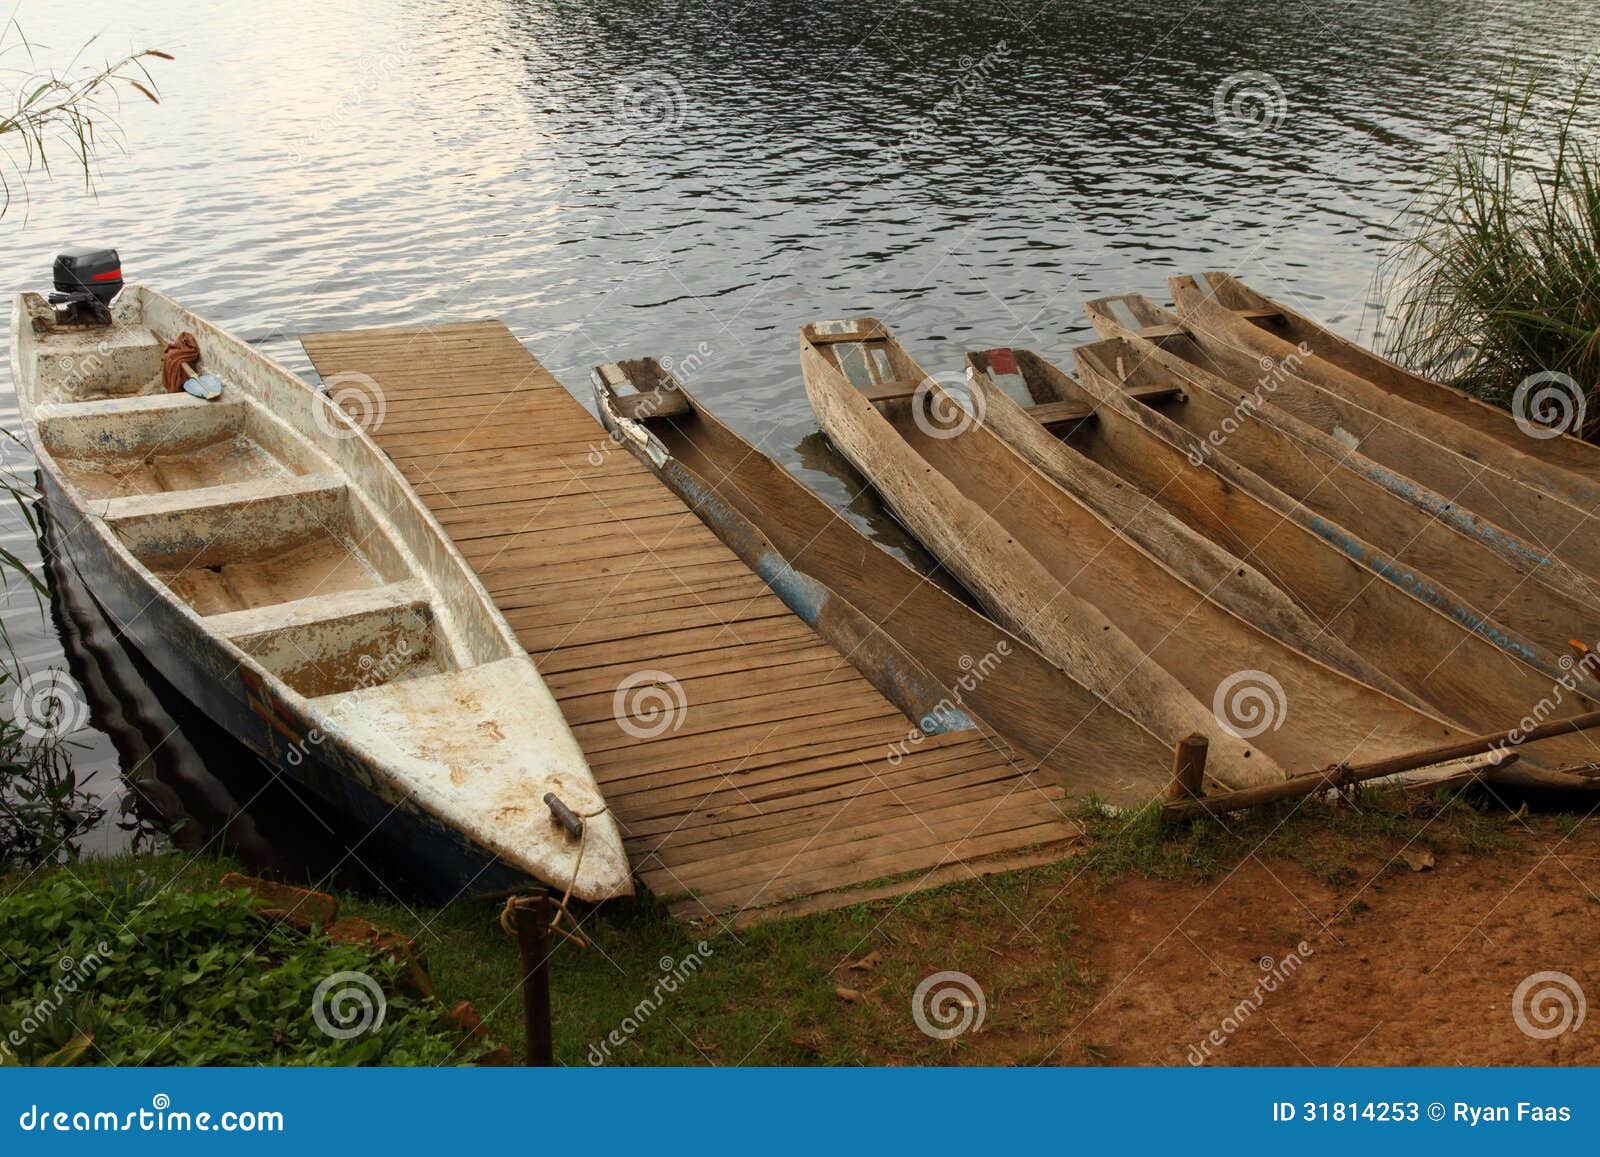  Dugout canoes and one boat launch waiting on a lake shore at the dock